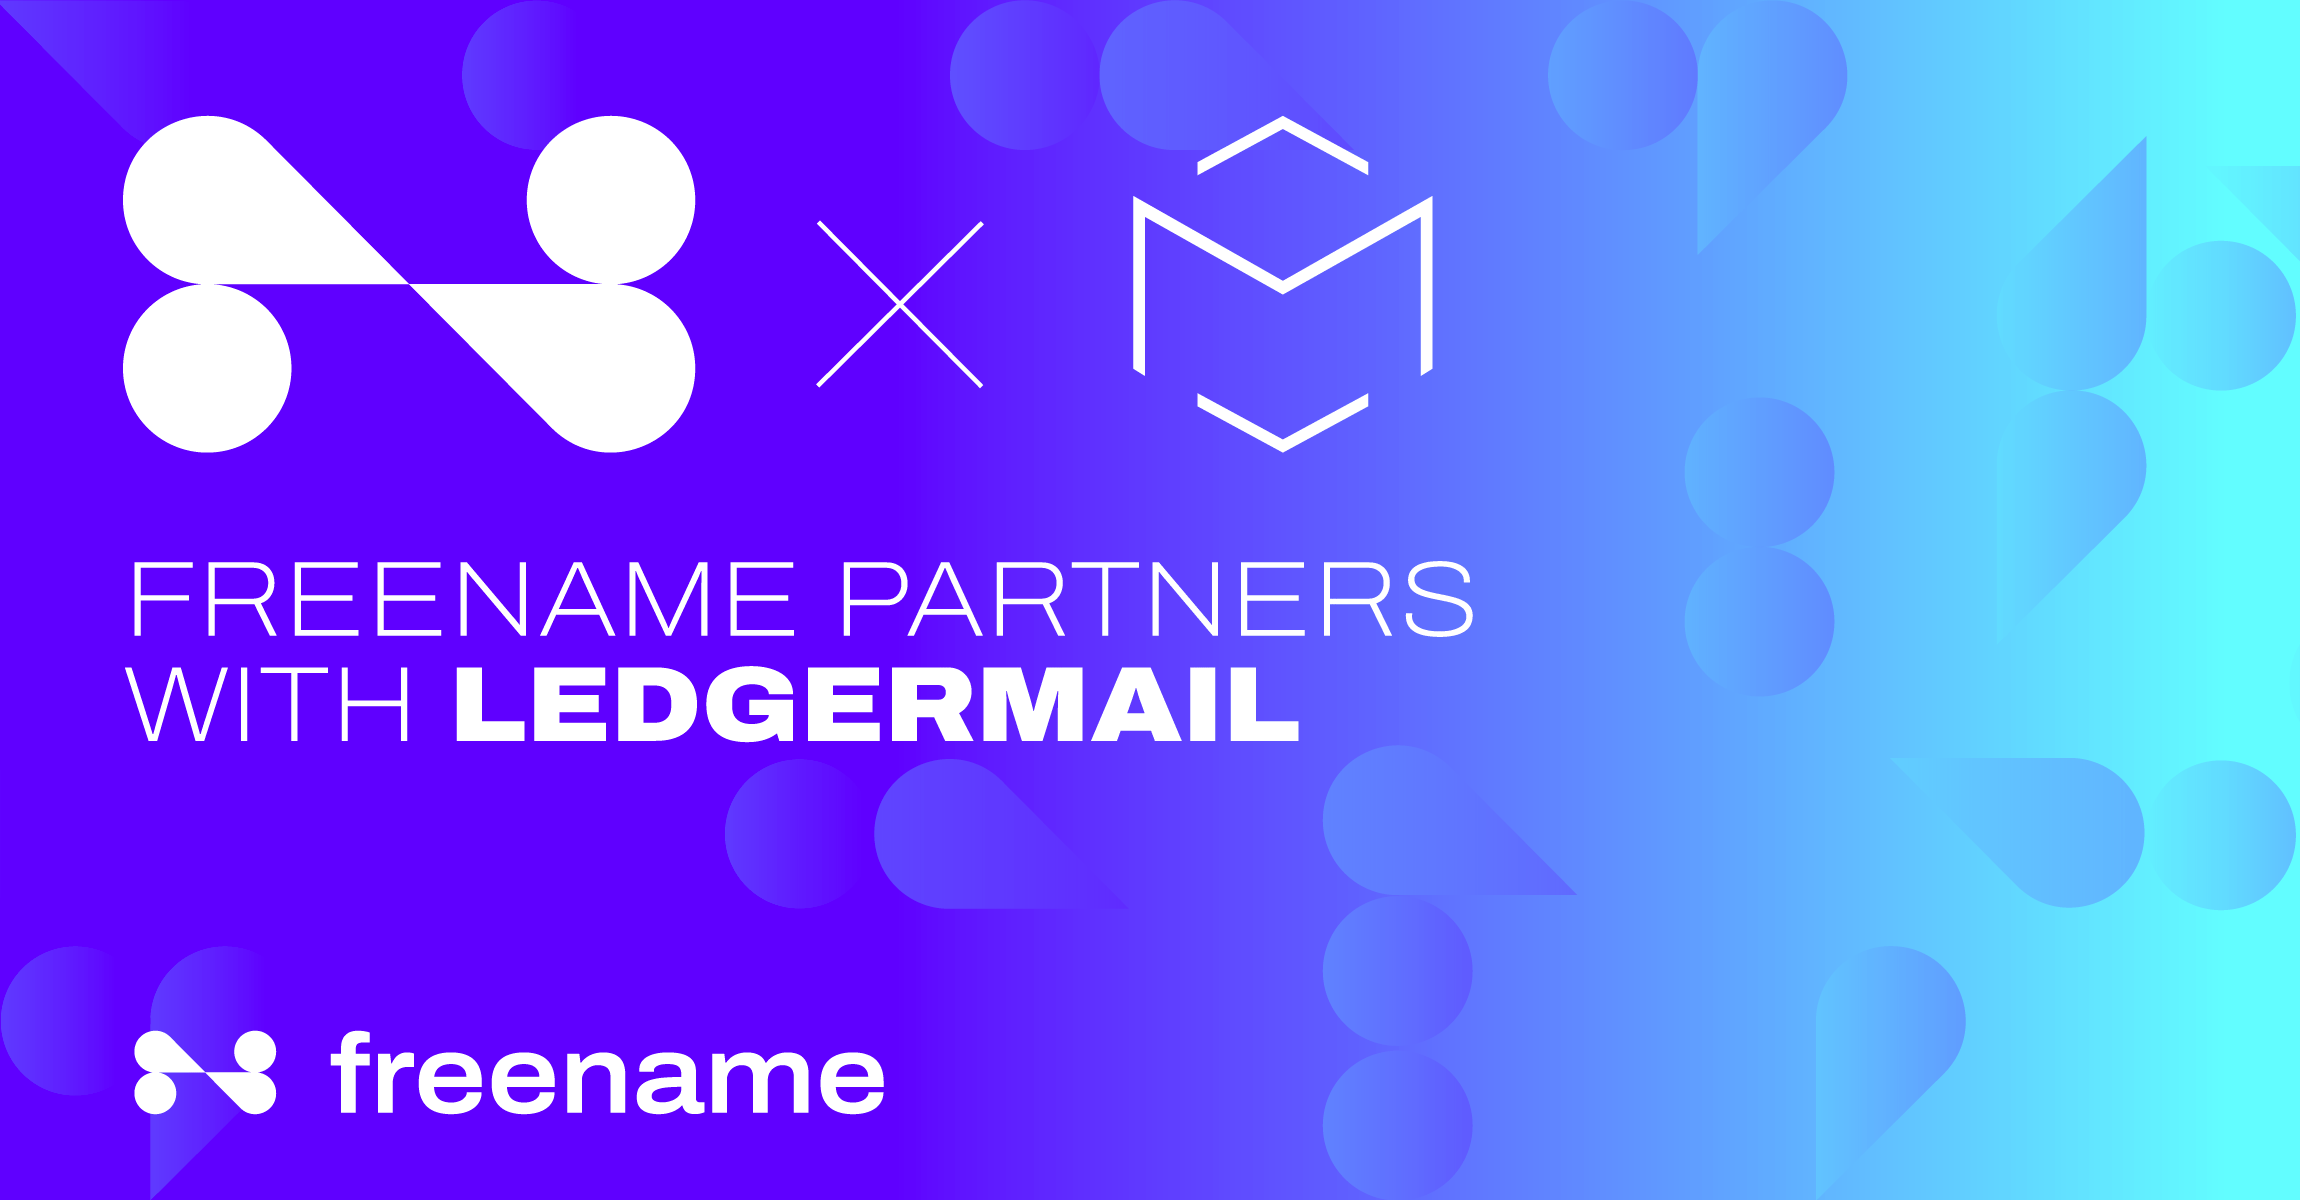 Freename Partners with Ledgermail